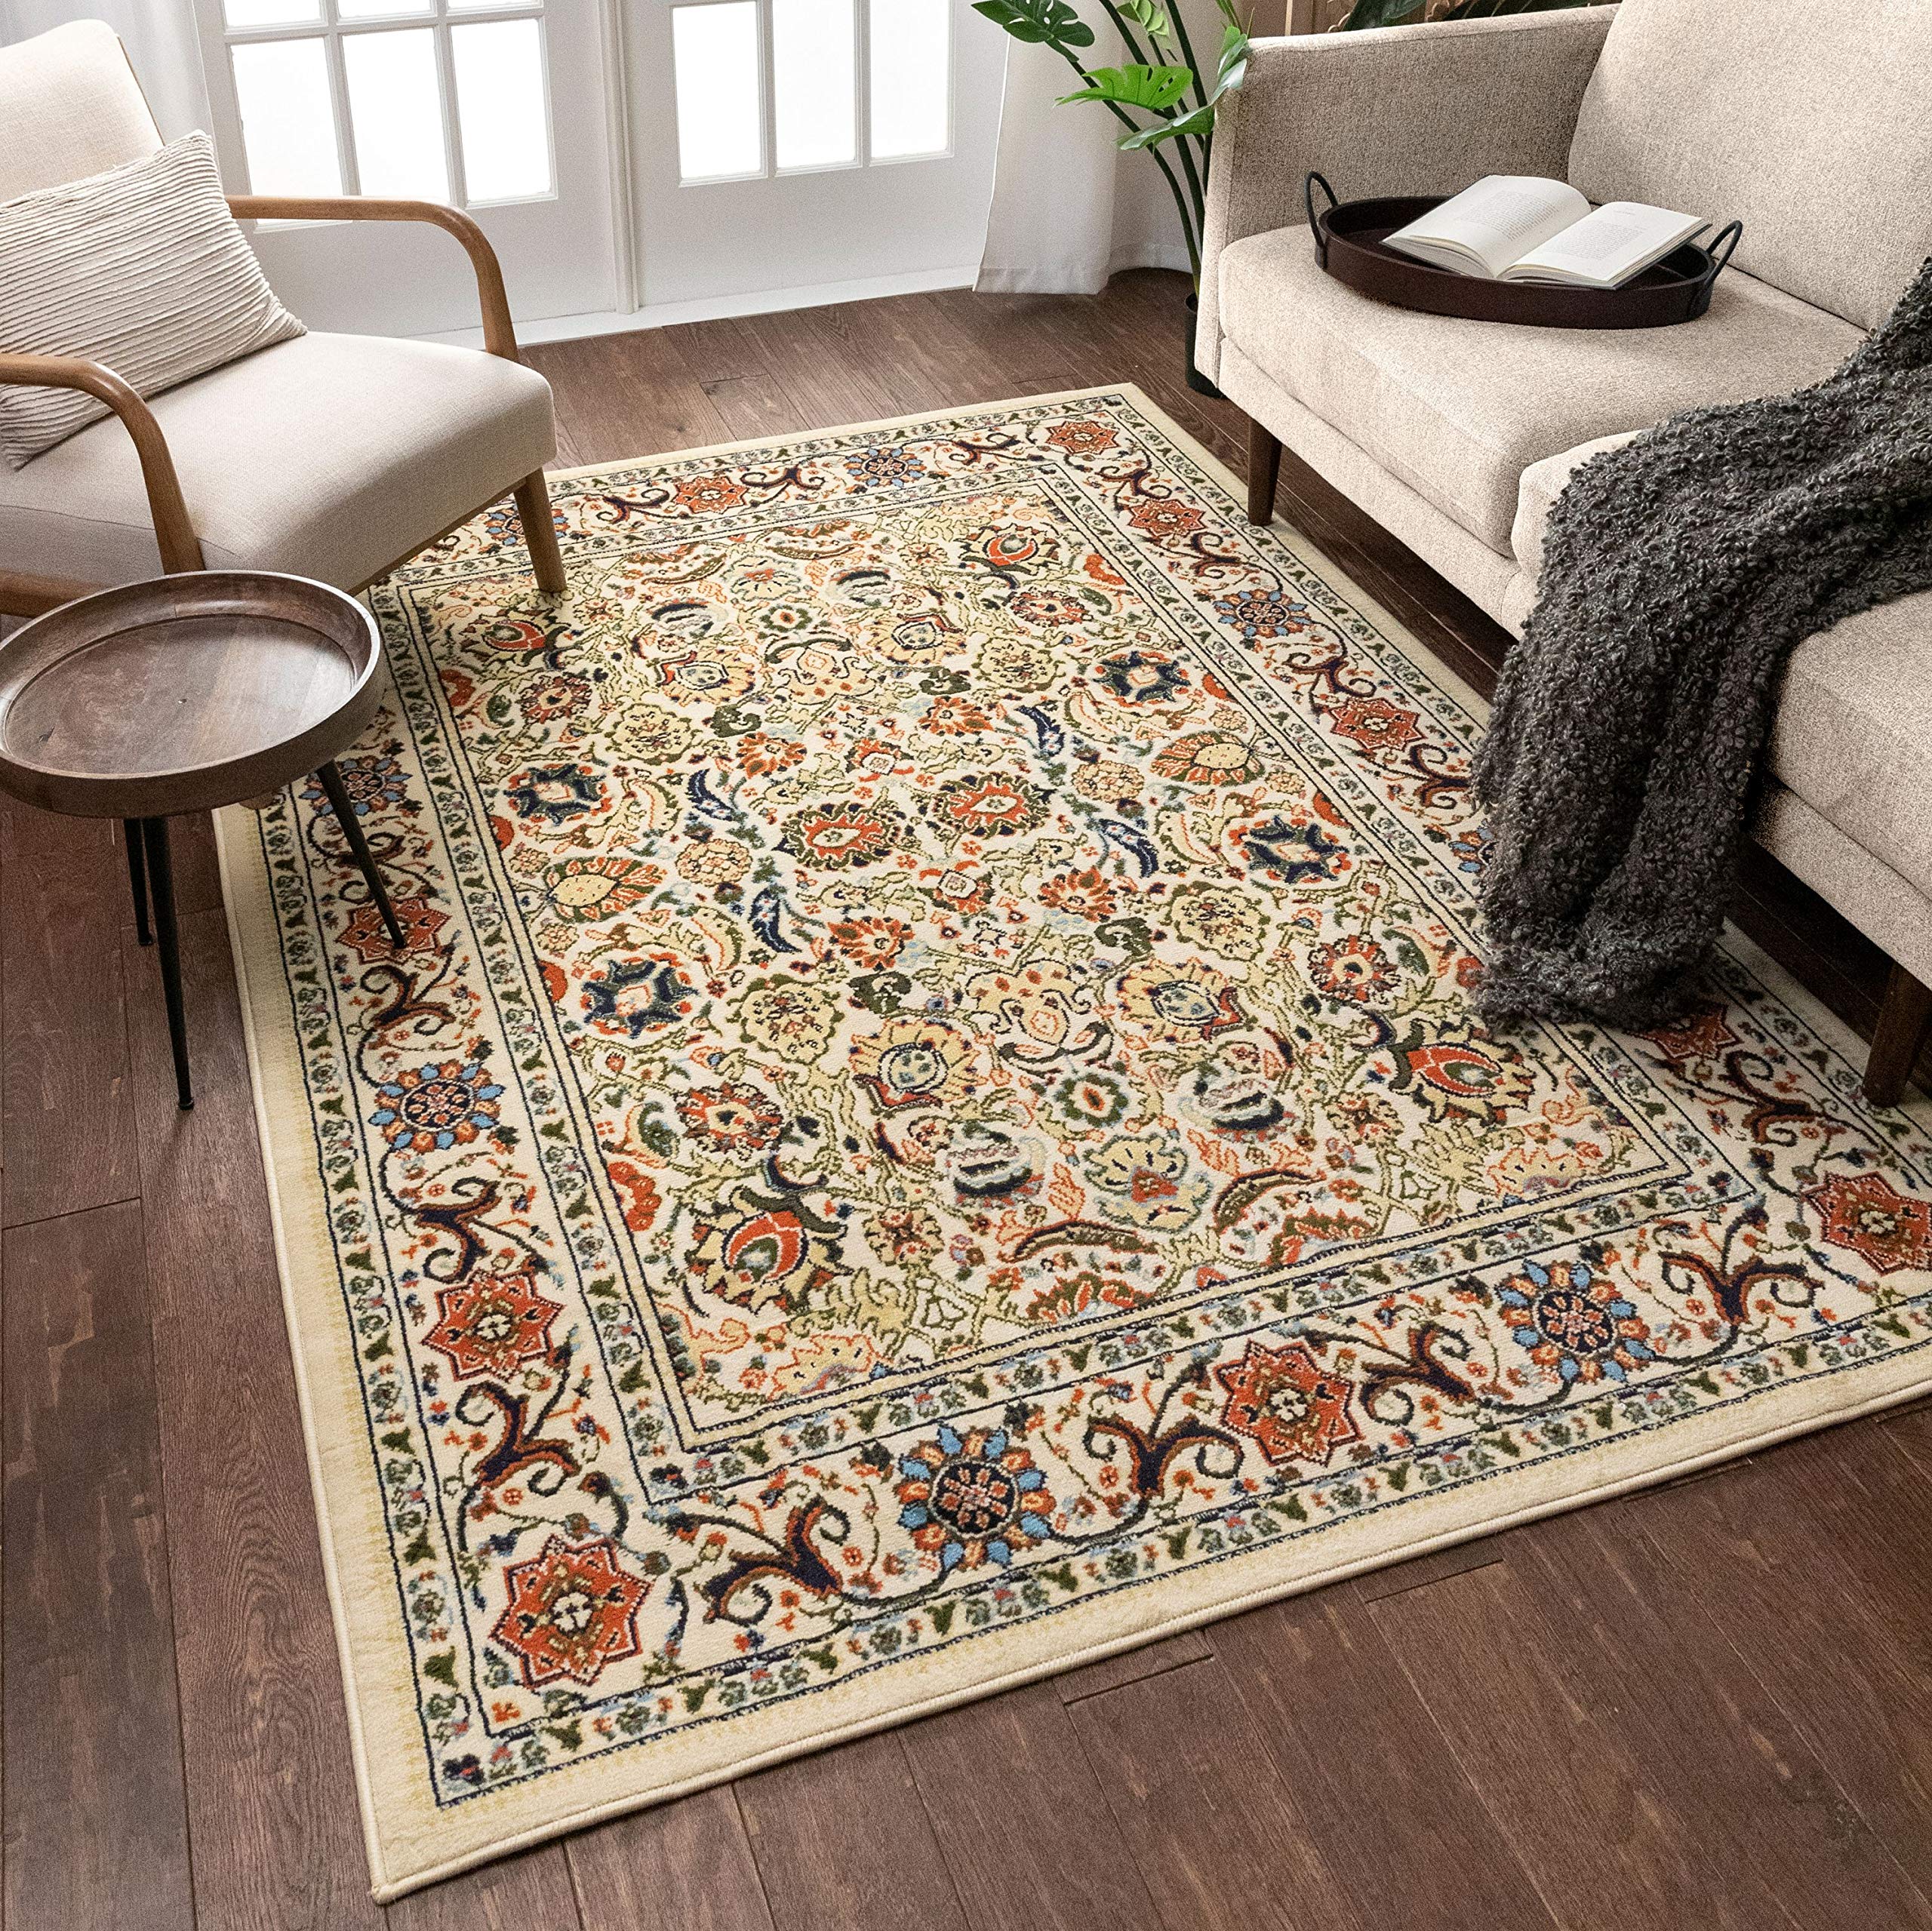 Well Woven Darya Ivory Modern Sarouk Area Rug Updated Traditional Persian Style (3'11" x 5'3")